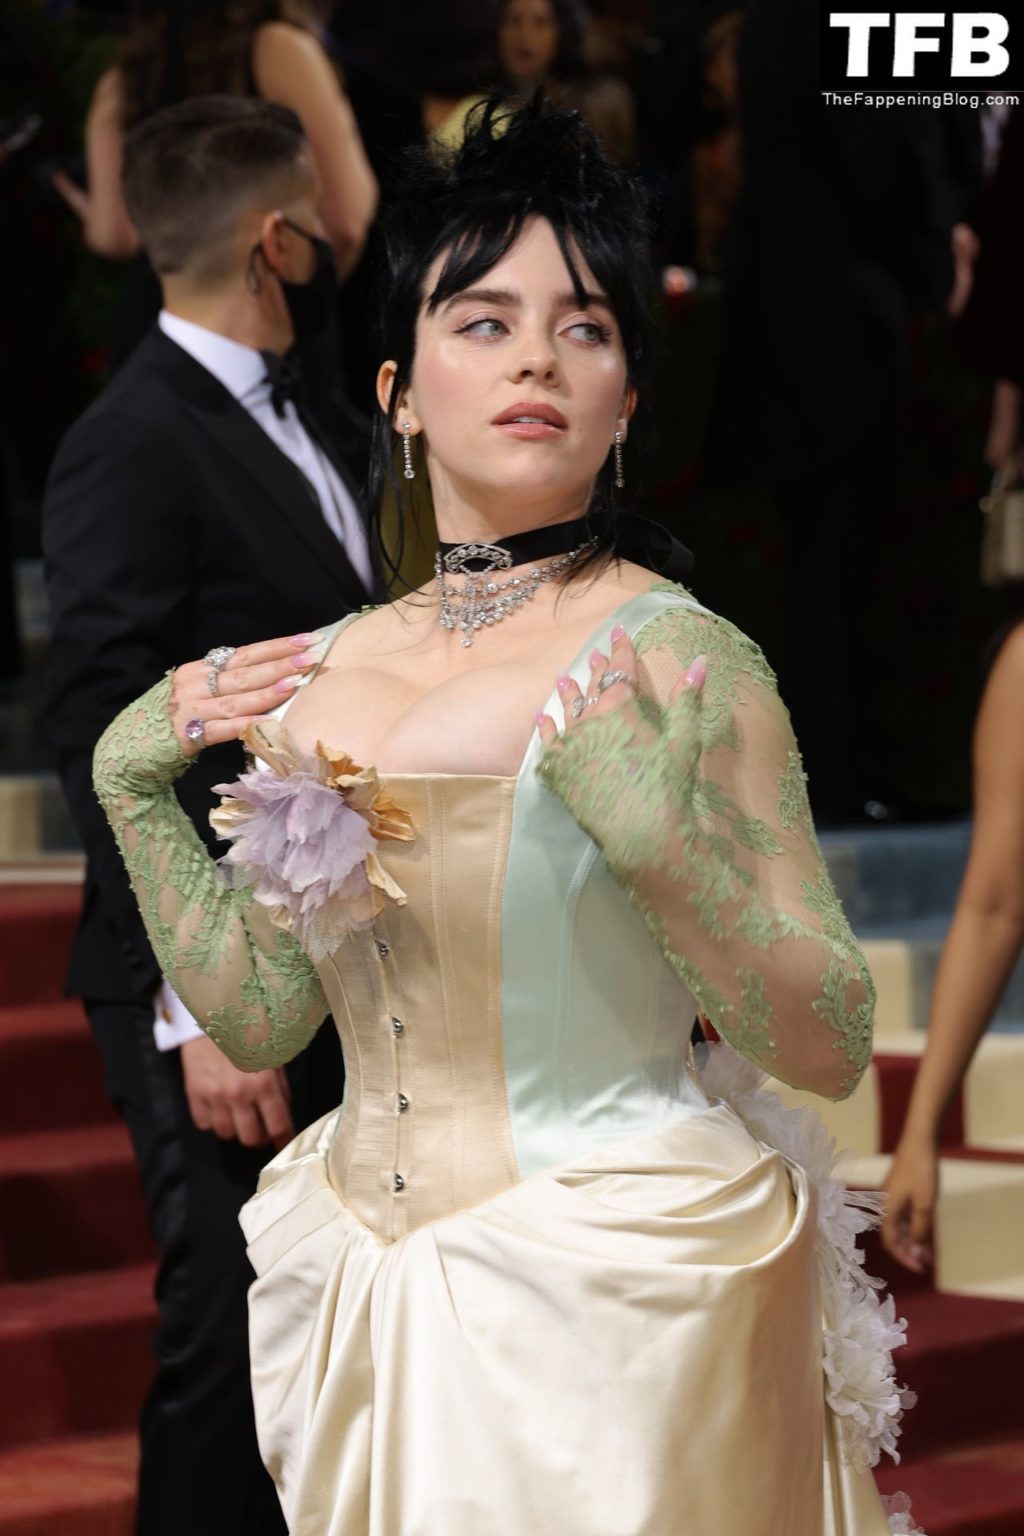 Billie Eilish Sexy The Fappening Blog 46 1024x1536 - Billie Eilish Showcases Nice Cleavage at The 2022 Met Gala in NYC (155 Photos)